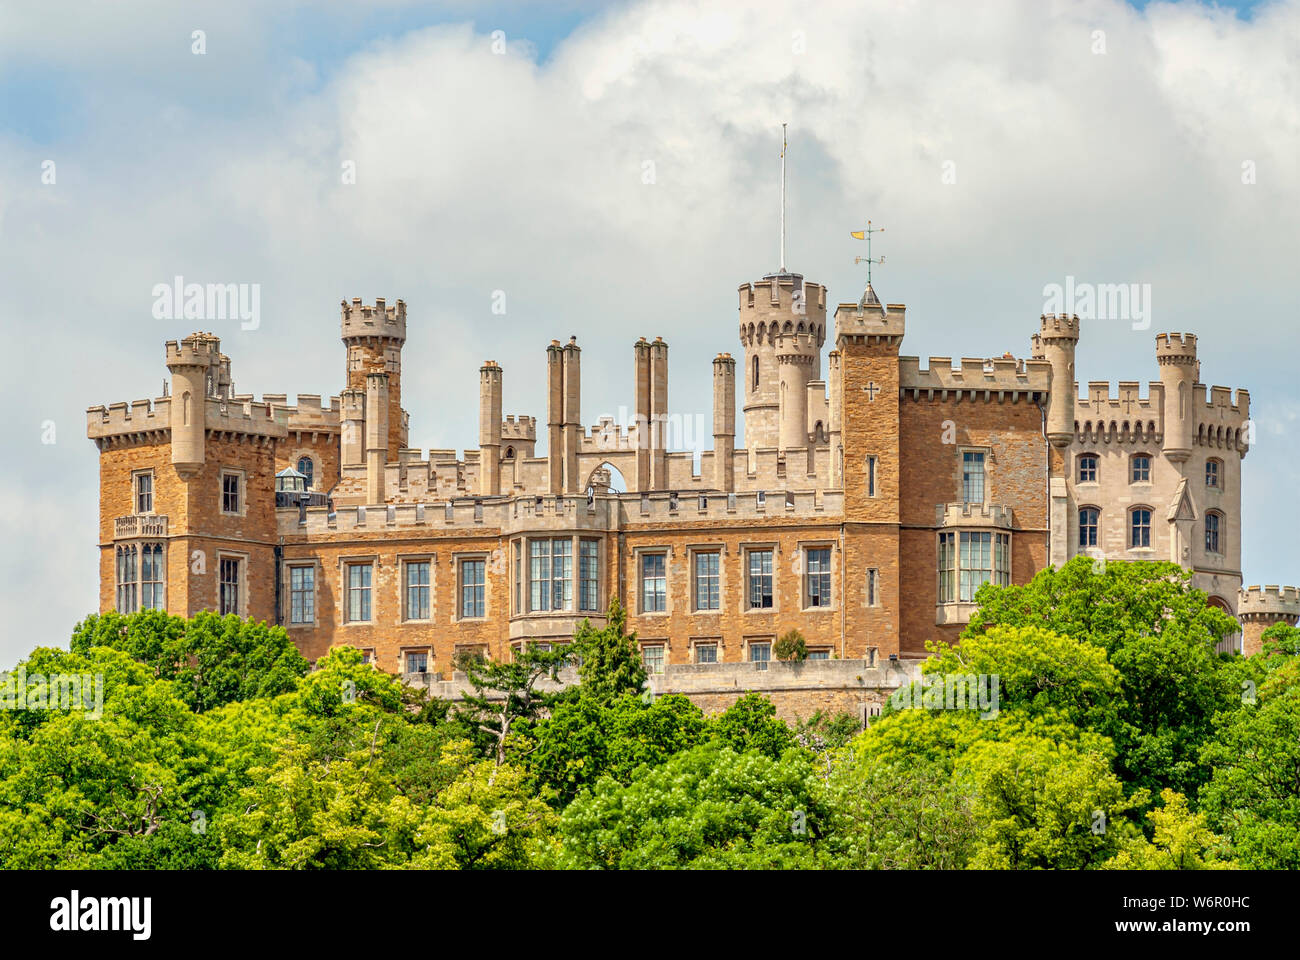 Belvoir Castle, a stately home in the English county of Leicestershire, overlooking the Vale of Belvoir, UK Stock Photo